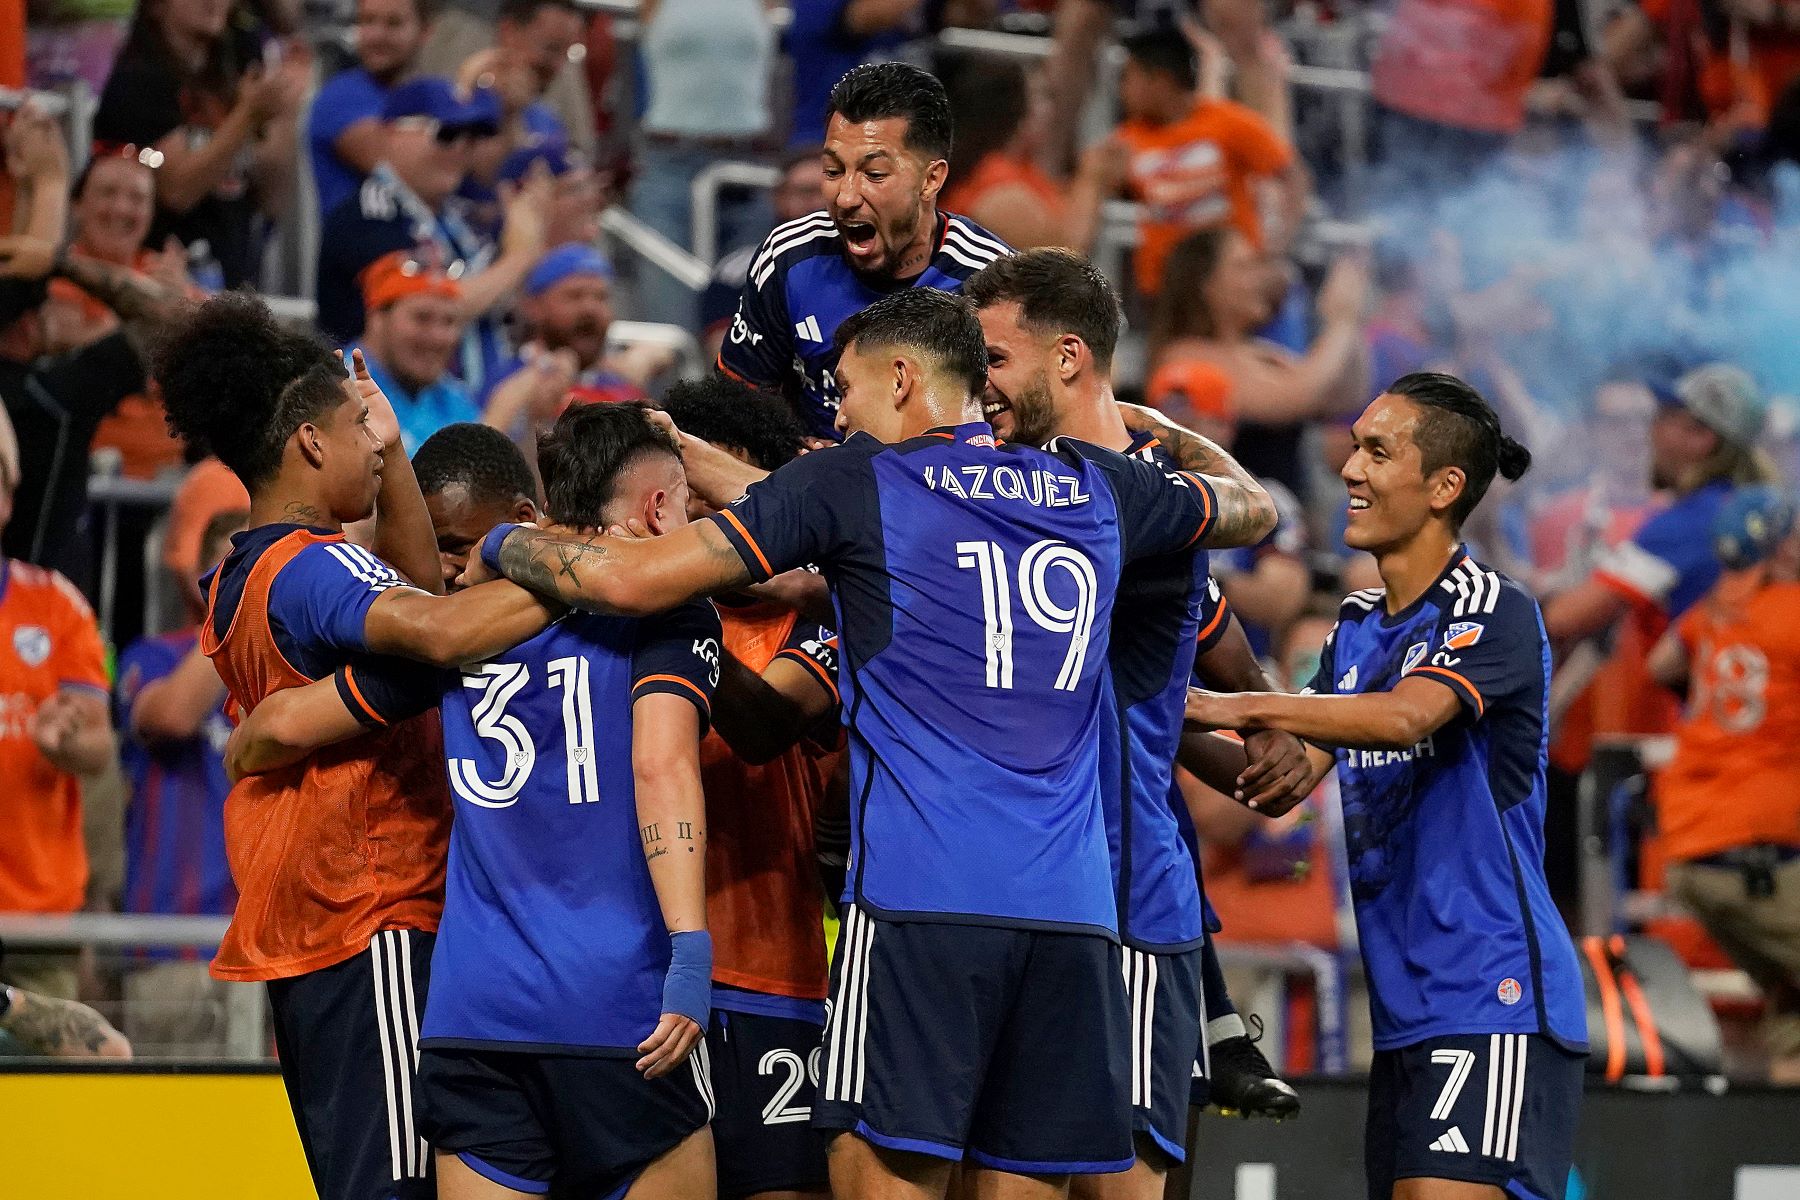 MLS Clubs FC Cincinnati and Houston Dynamo advance on first night of 2023 US Open Cup quarterfinals